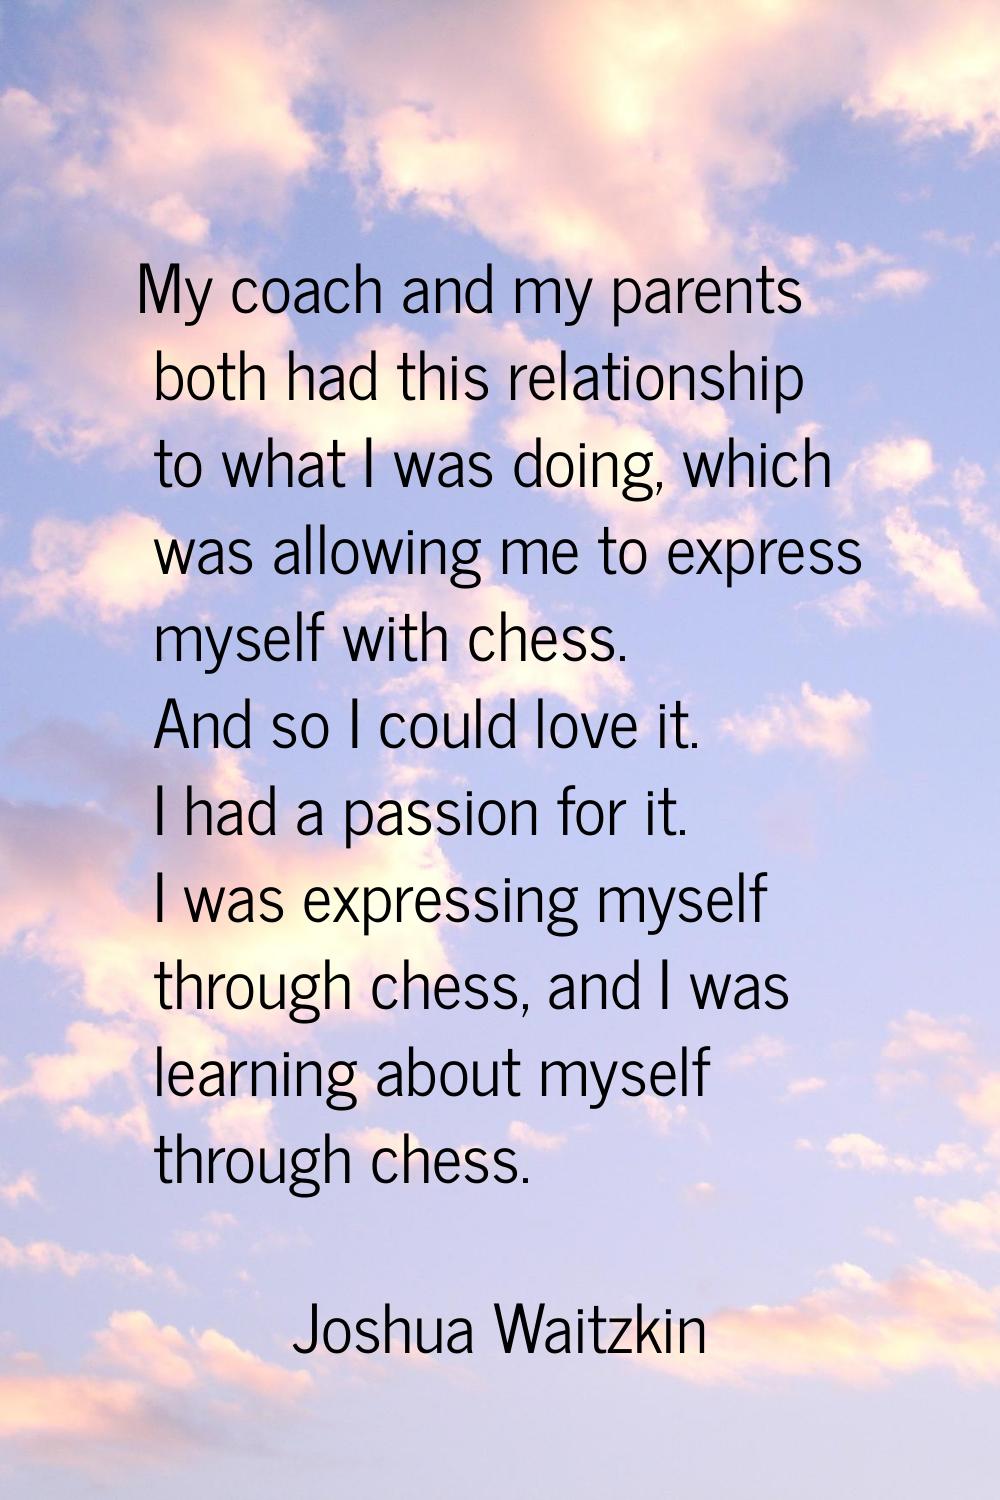 My coach and my parents both had this relationship to what I was doing, which was allowing me to ex